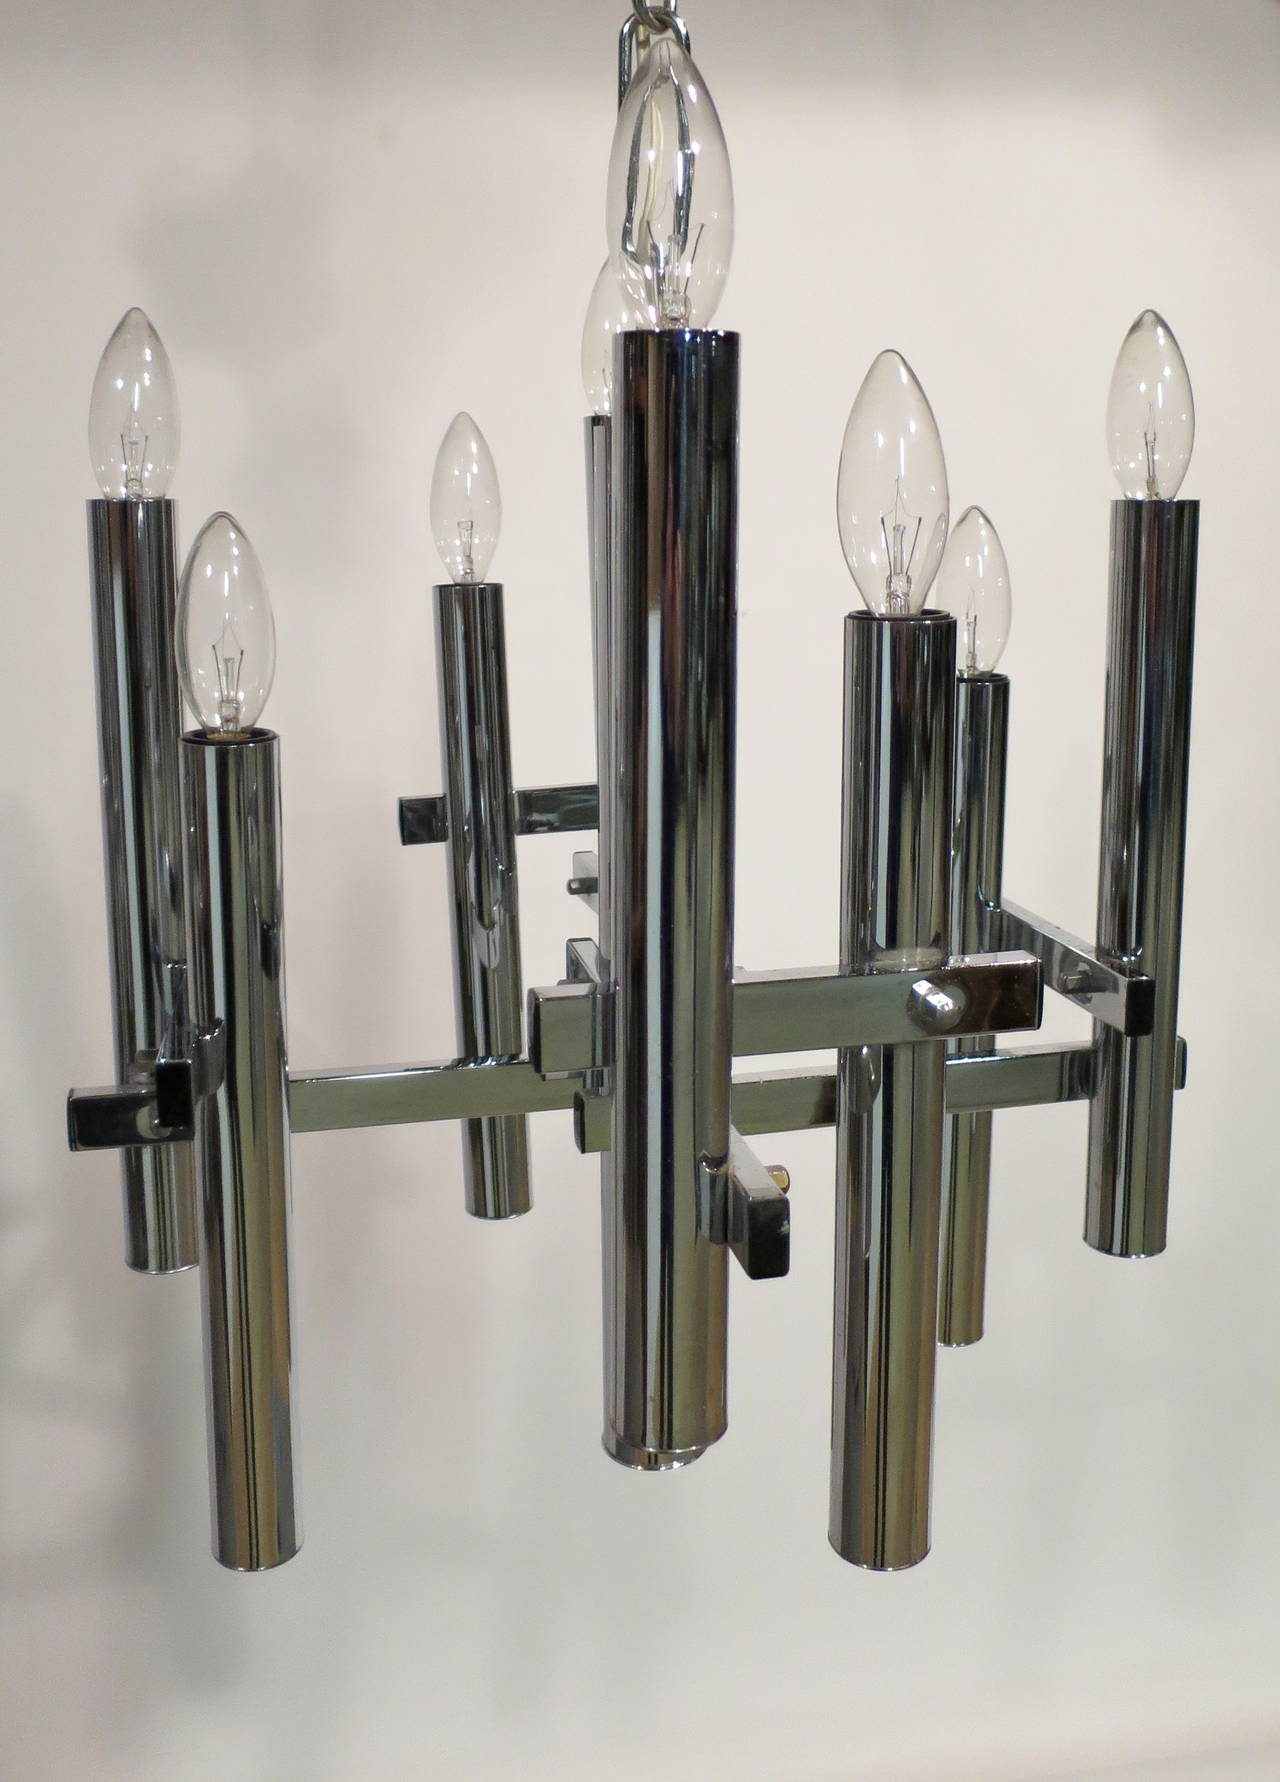 Pair of Modern 1970's Chrome Chandeliers.  Very nice original condition.  Measure 17